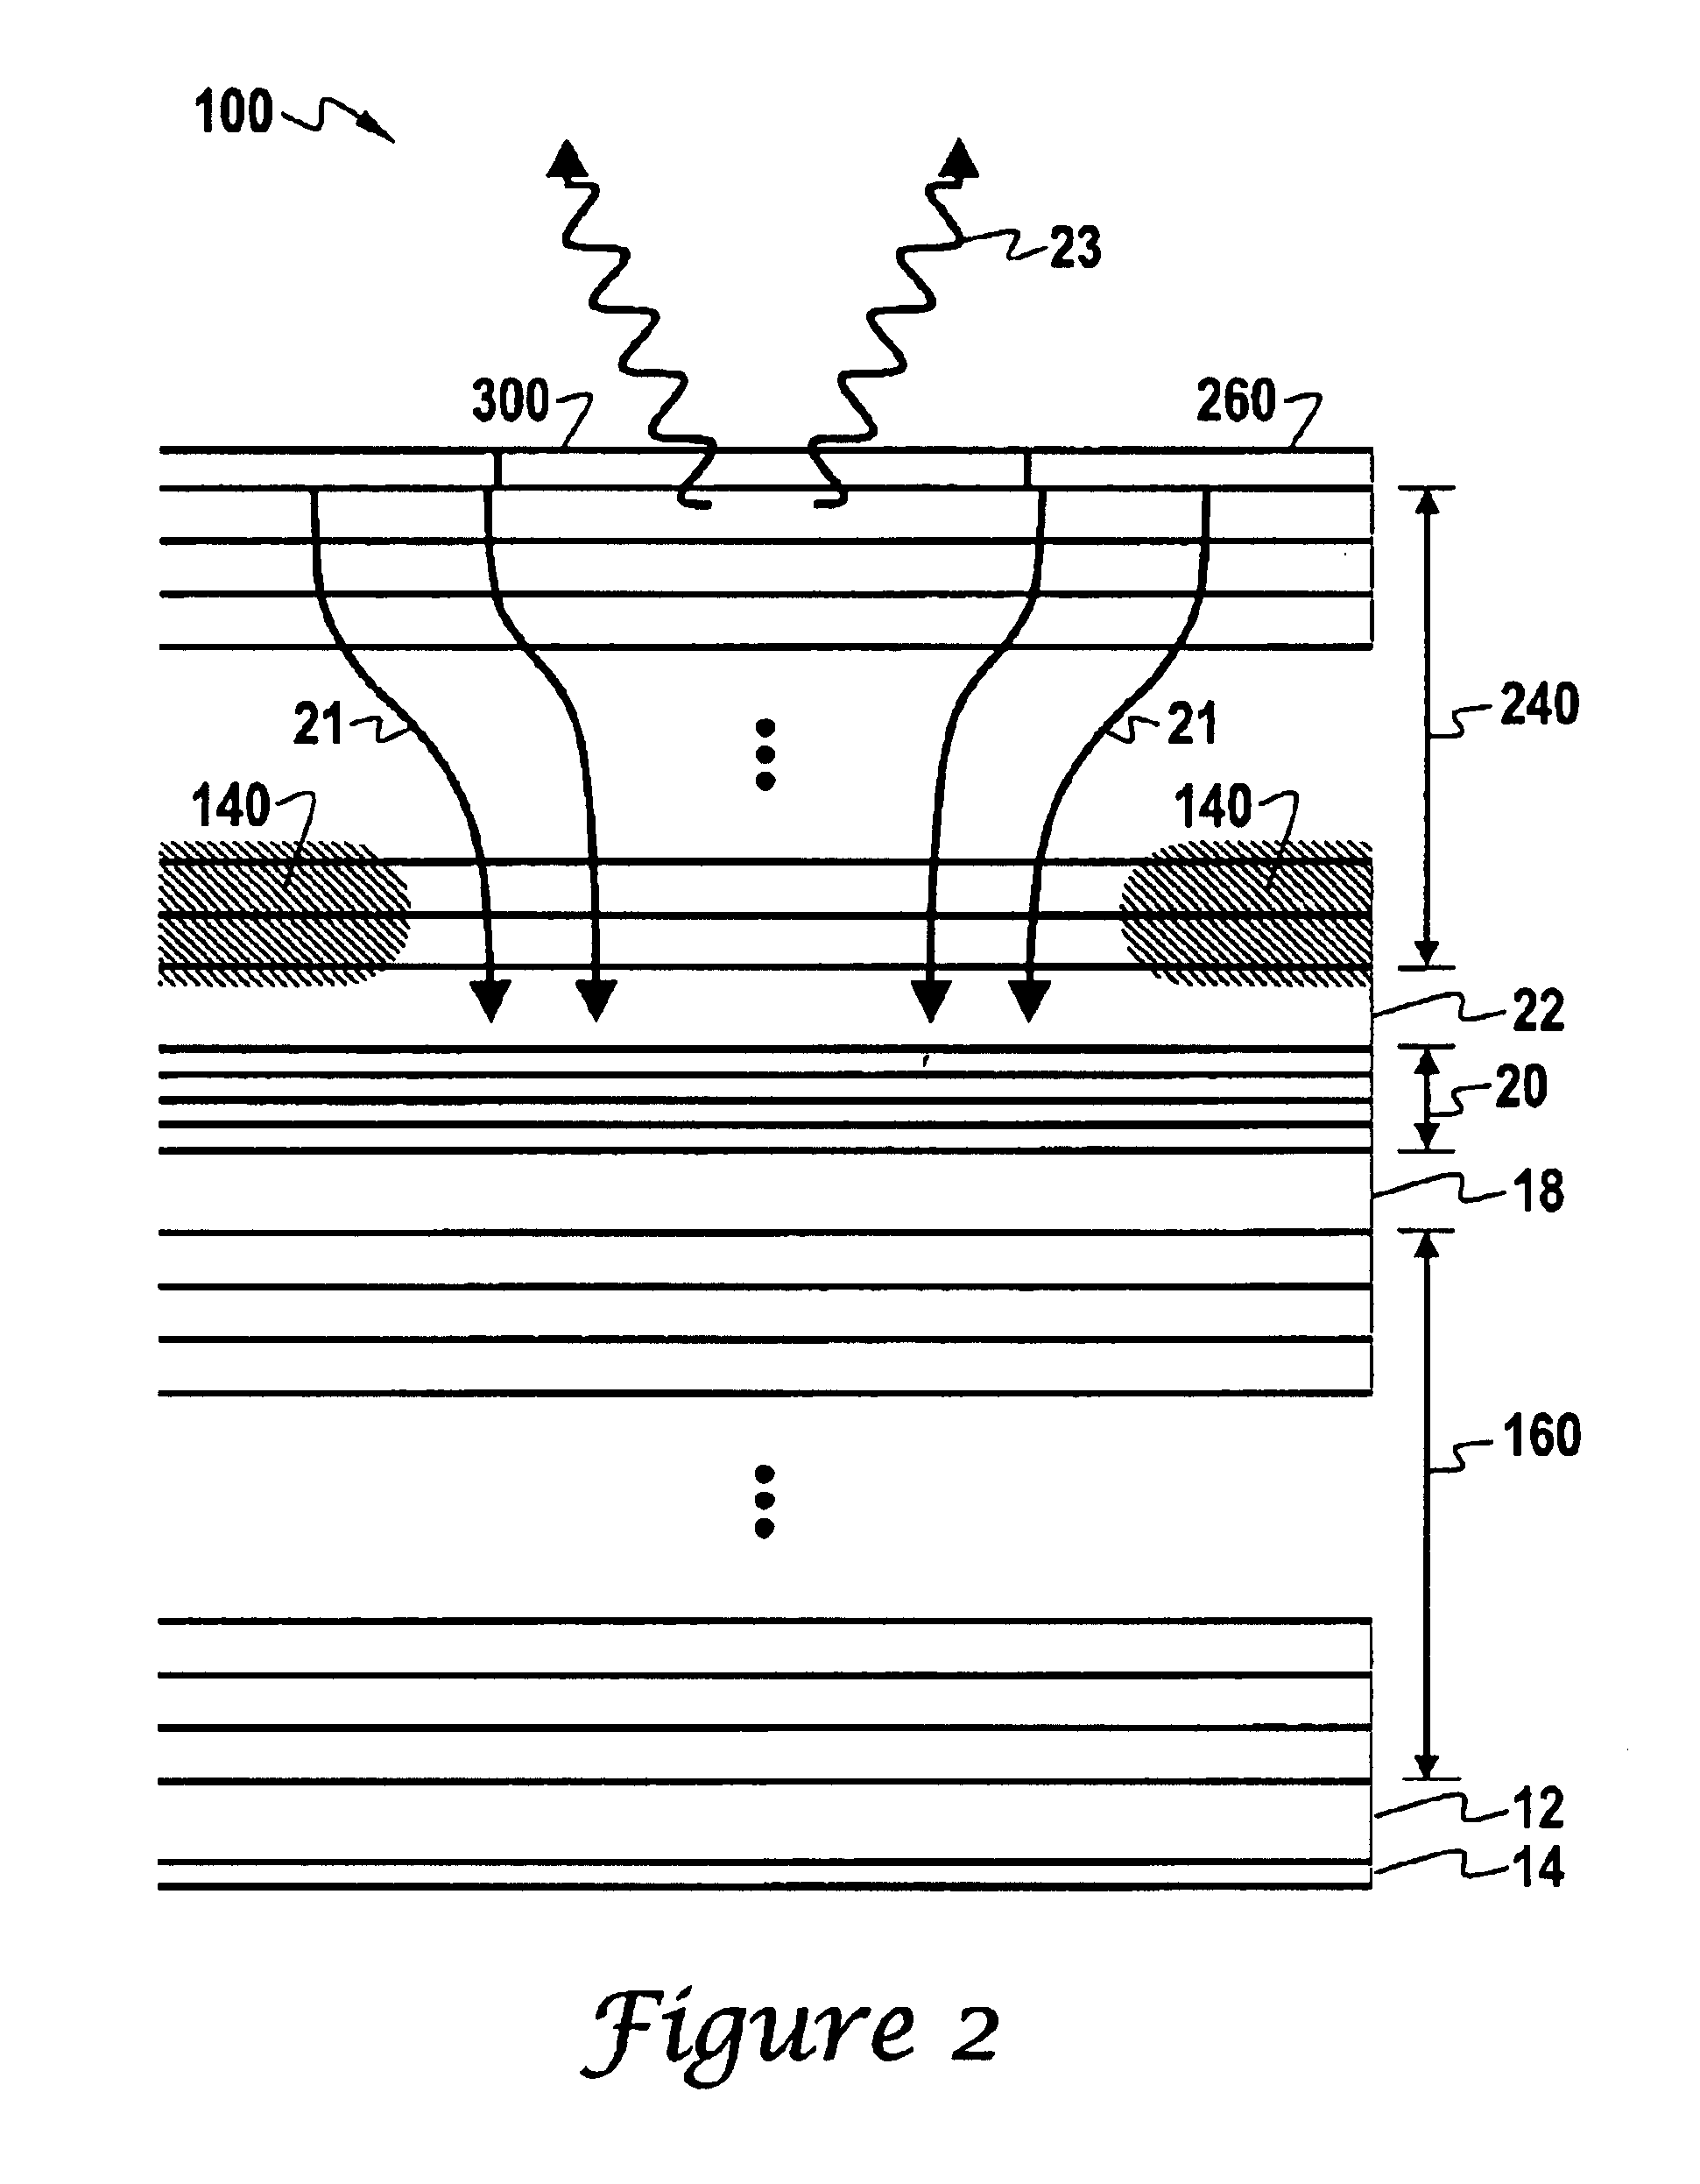 Asymmetric distributed Bragg reflector for vertical cavity surface emitting lasers